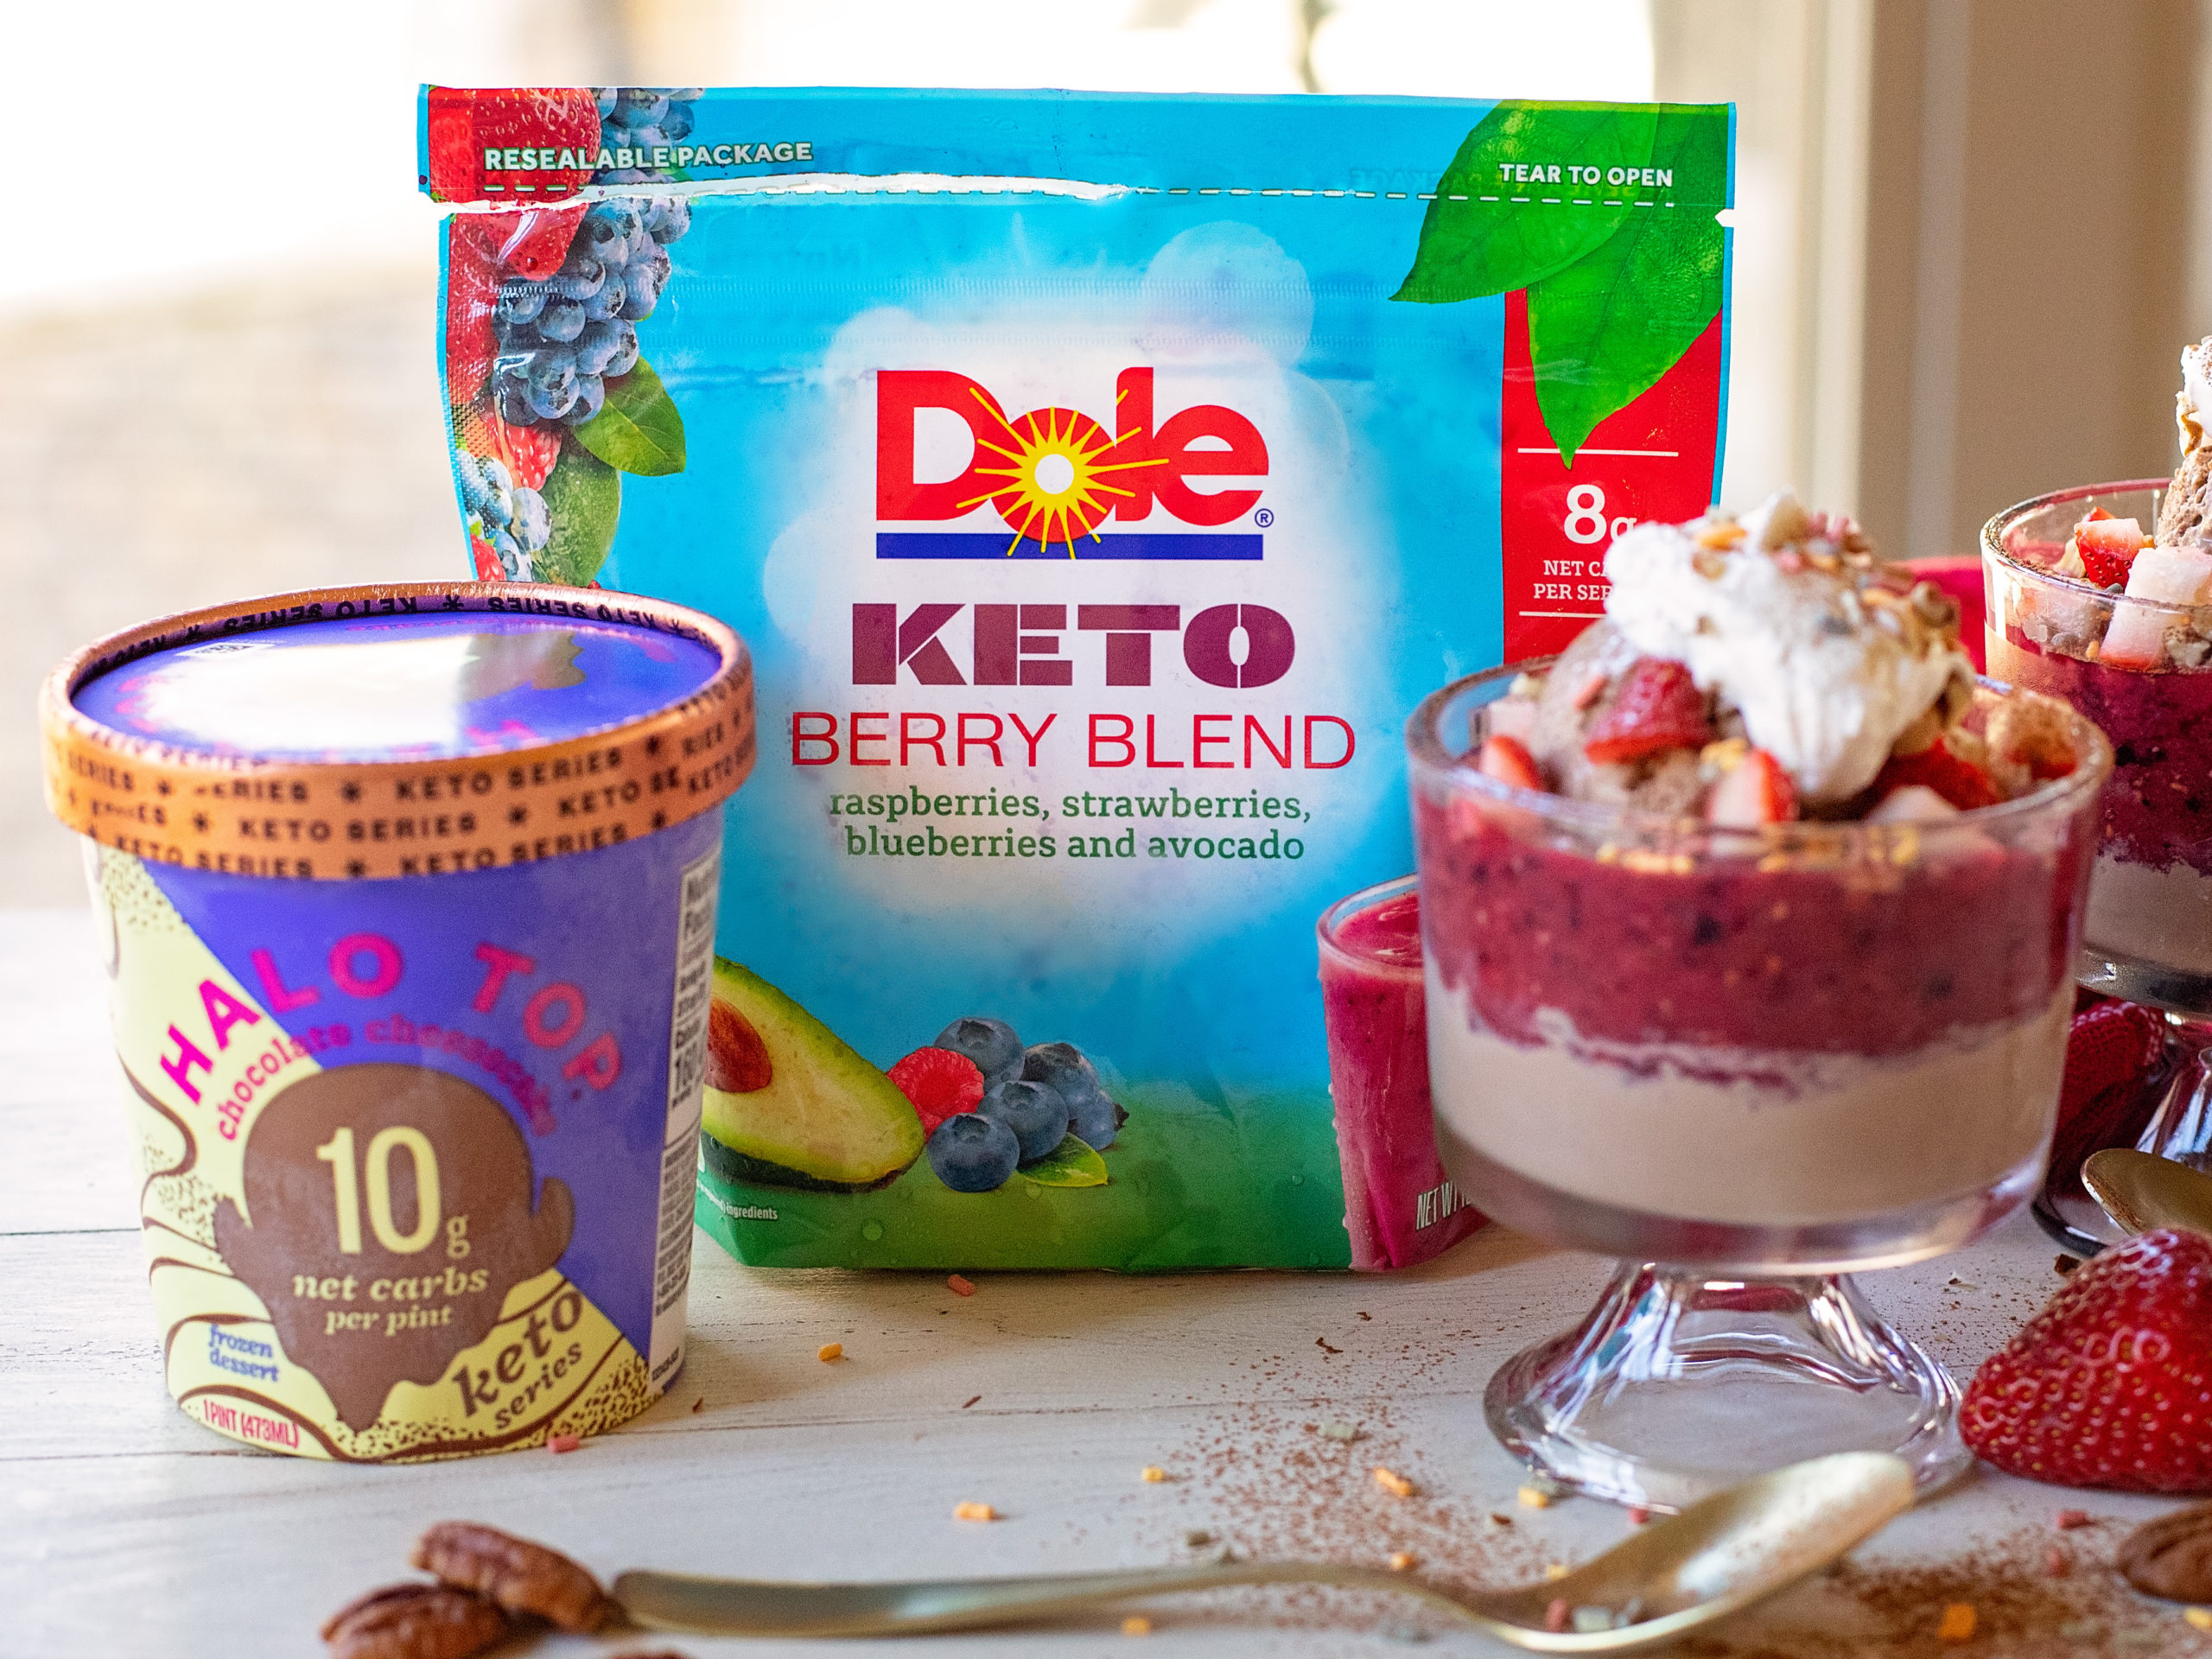 Save $2 On Dole® Keto Berry Blend & Halo Top® Keto Ice Cream And Try My Very Berry Chocolate Cheesecake Sundae on I Heart Publix